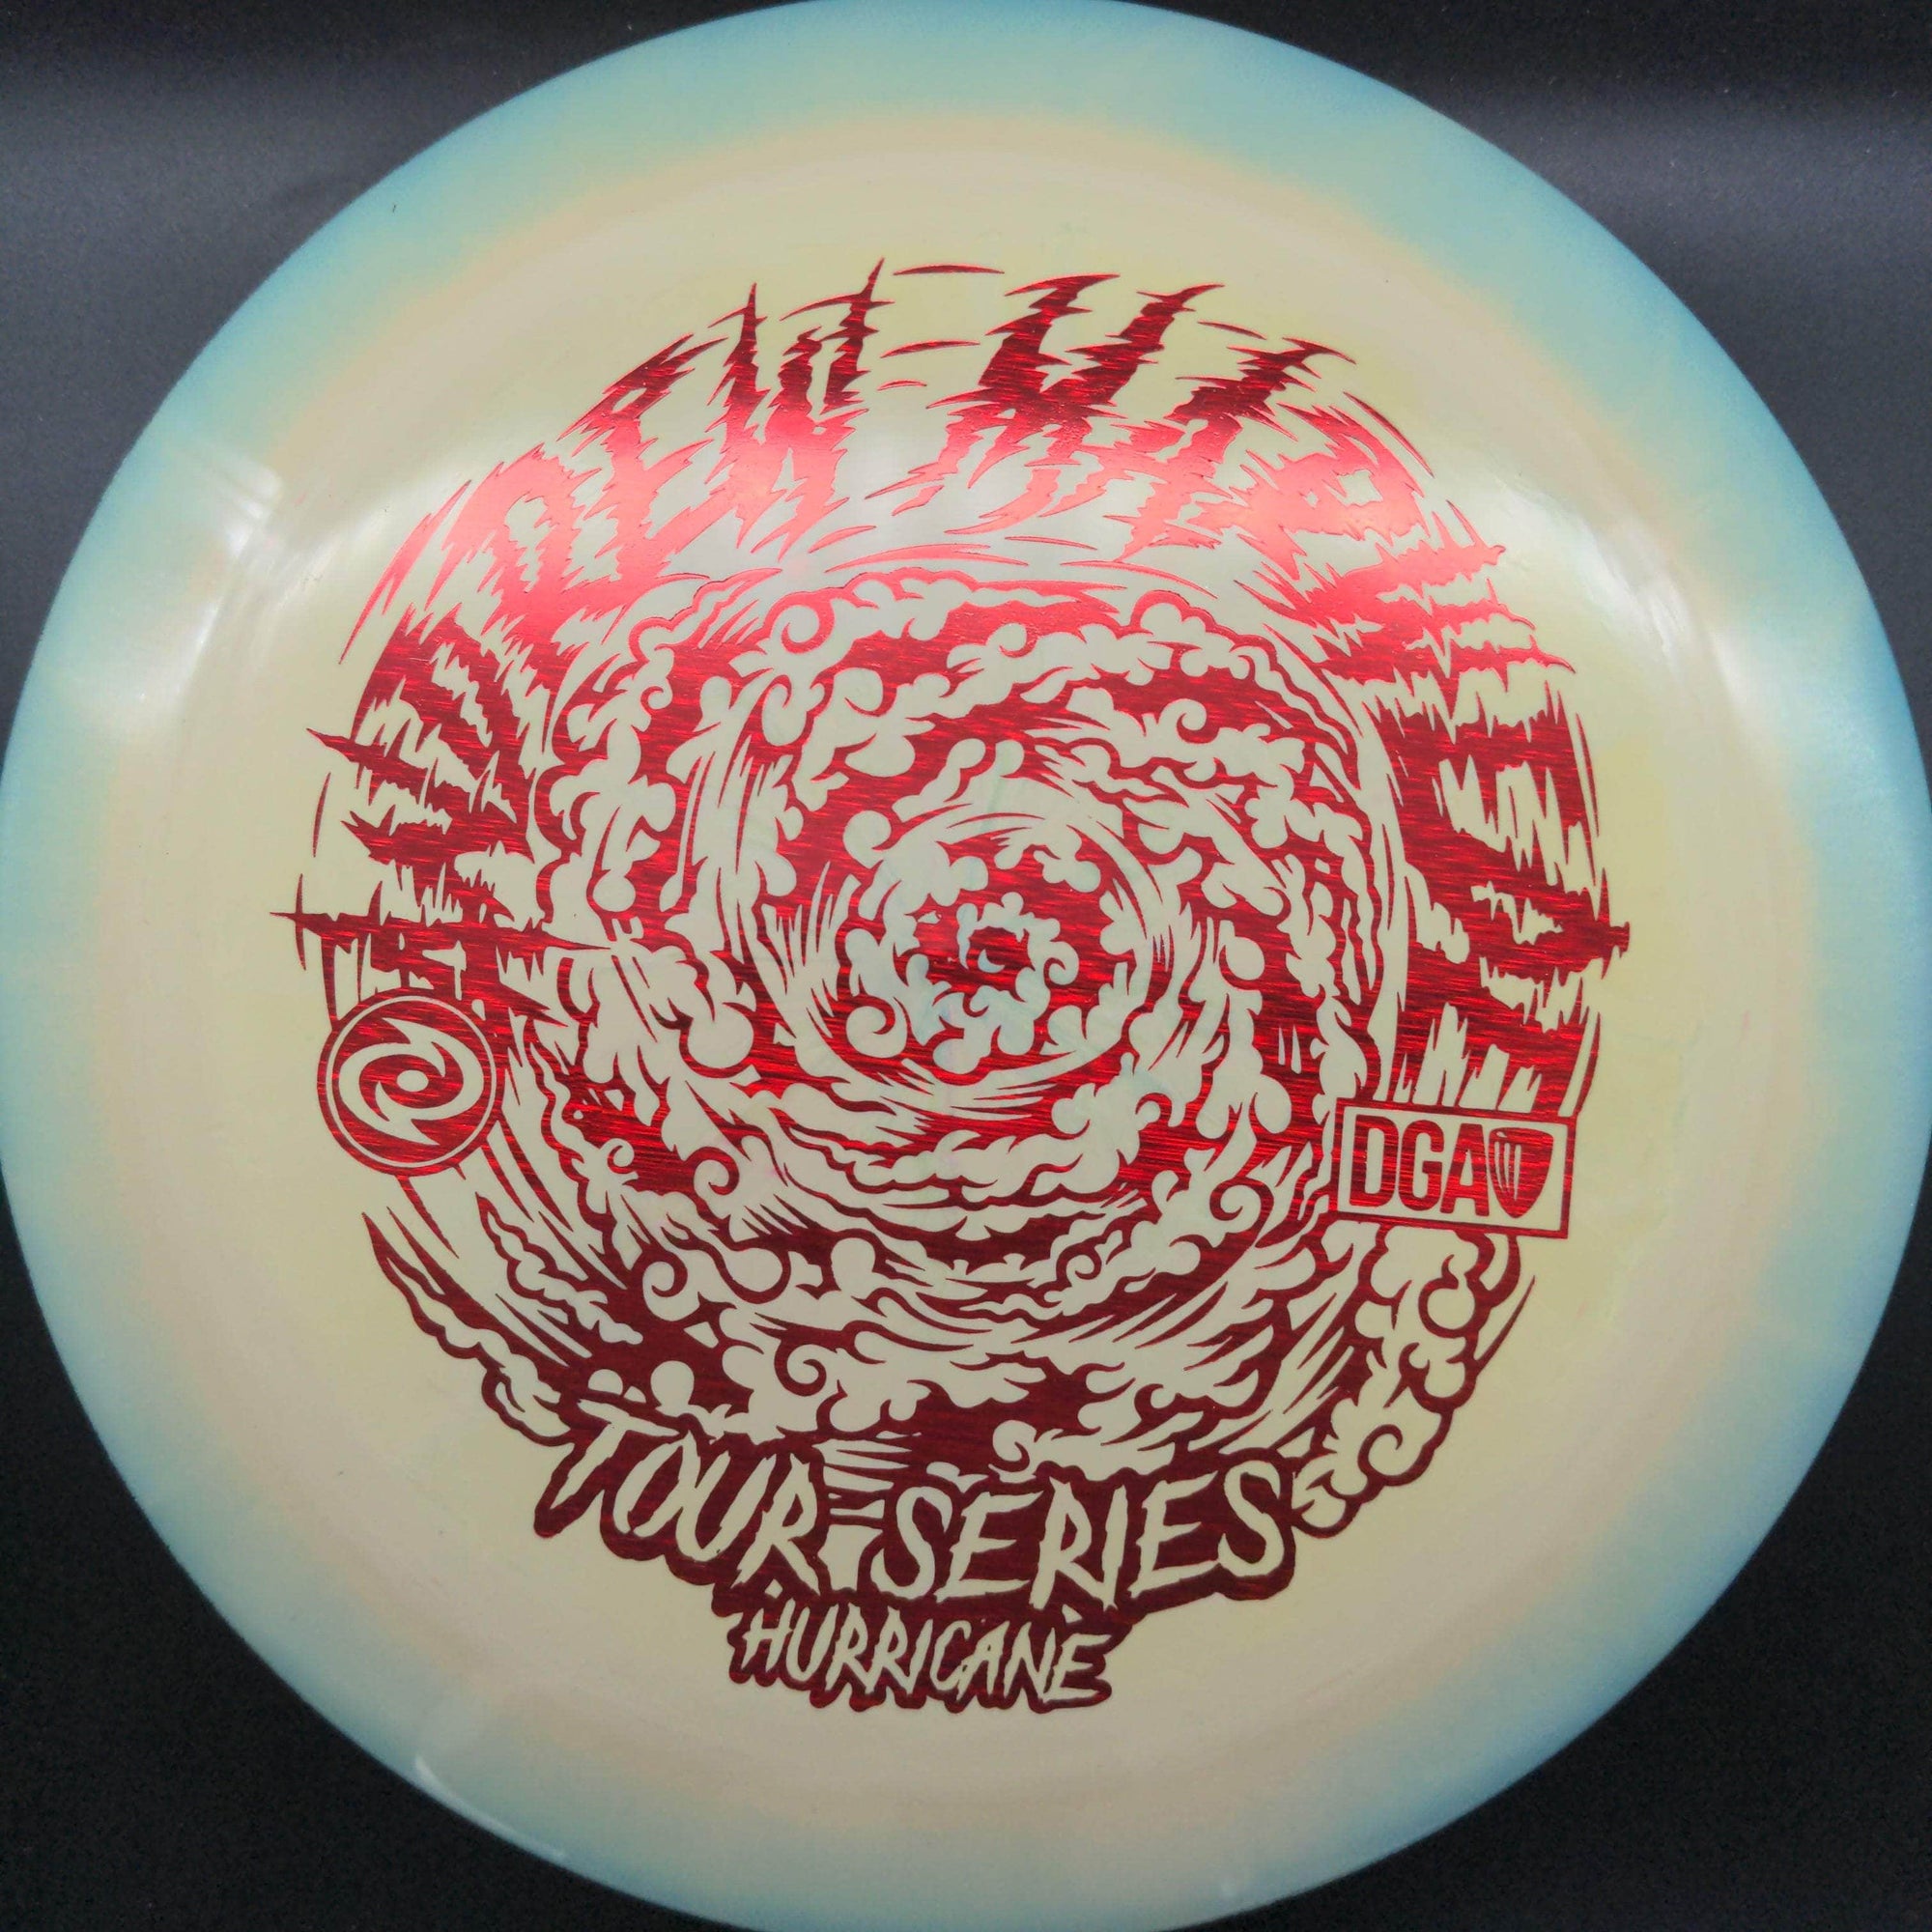 DGA Distance Driver Yellow/Teal Halo Red Line Stamp 174g Hurricane, Swirl Proline, Andrew Marwede Tour Series